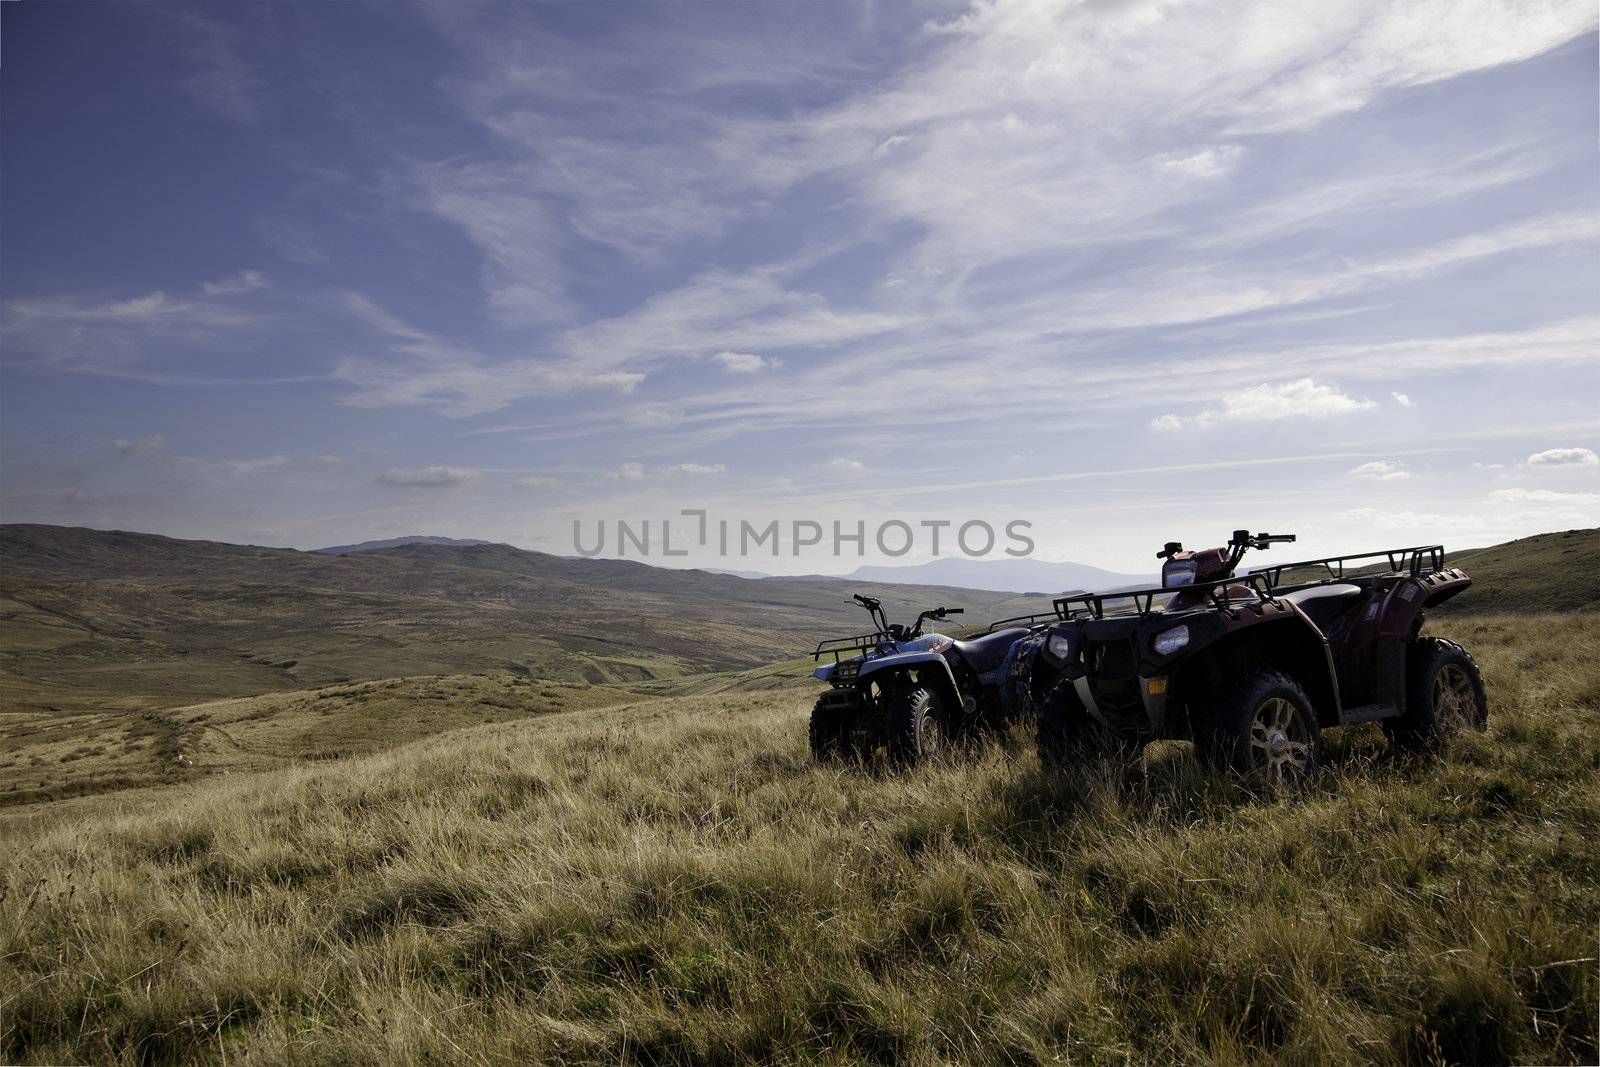 Pair of ATV quad bikes on lonely mountain by steheap